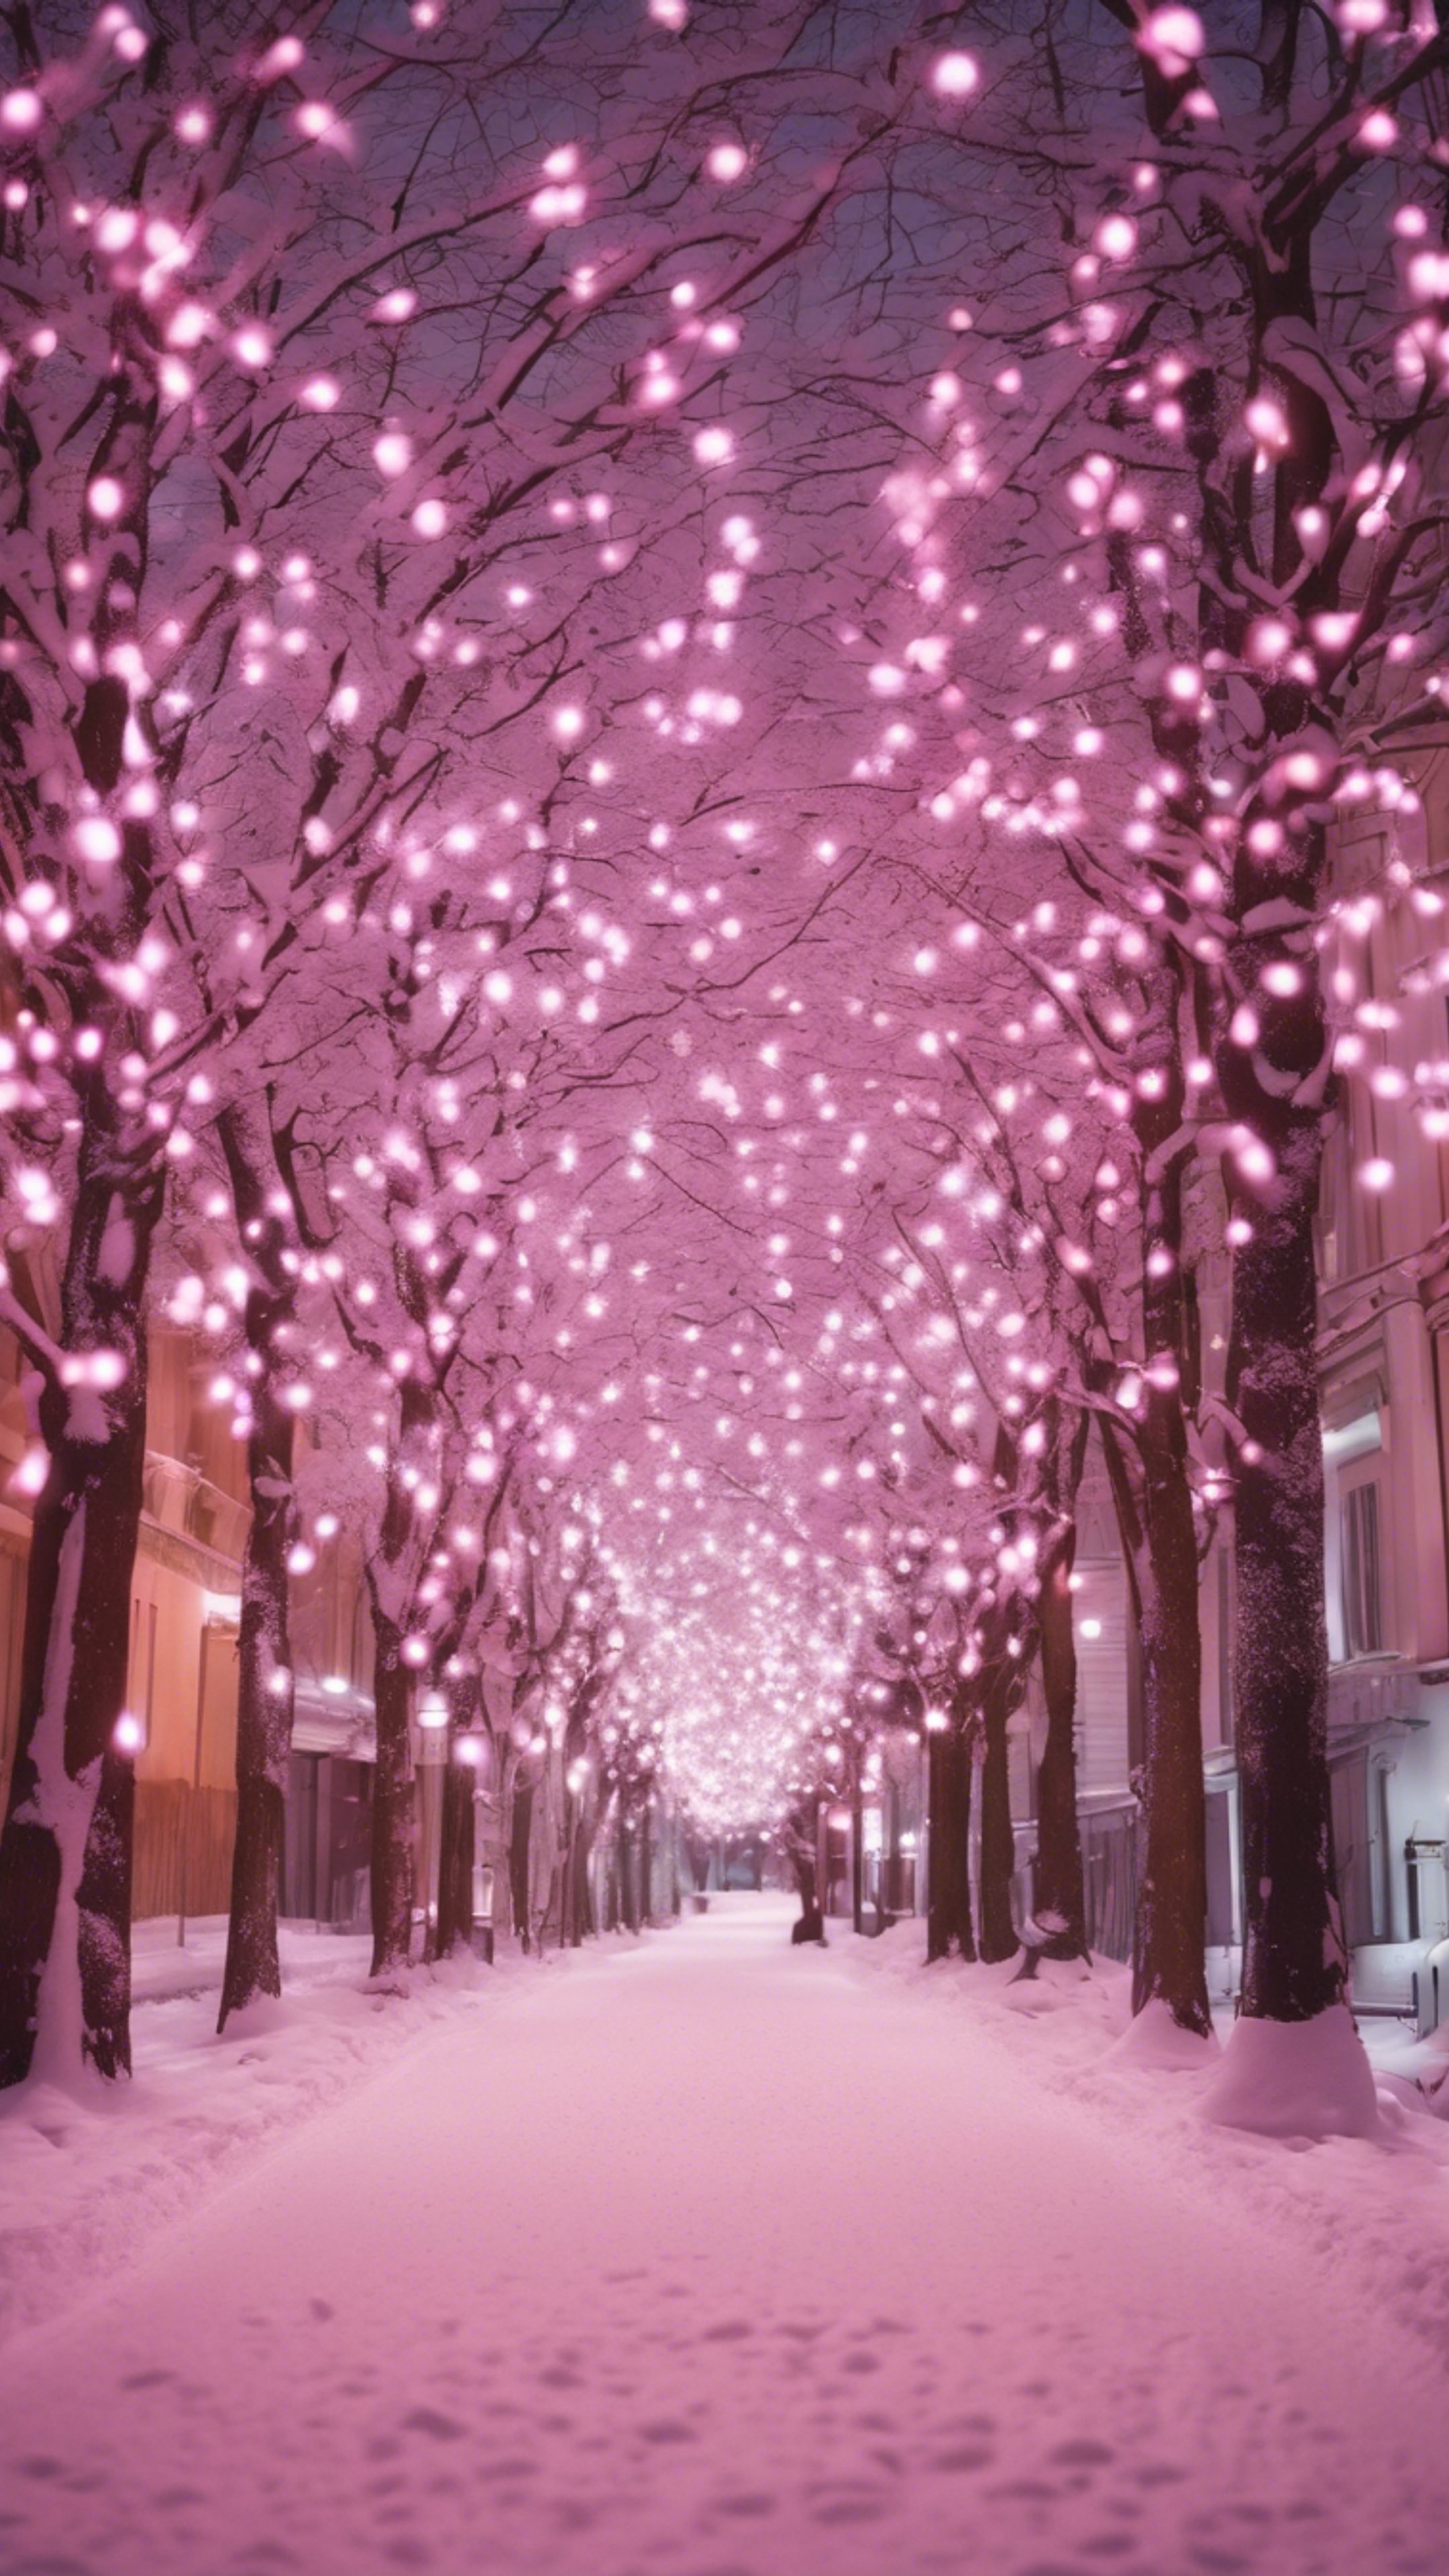 A snow-covered street illuminated by twinkling pink Christmas lights. Wallpaper[4ec6c372f2074900819e]